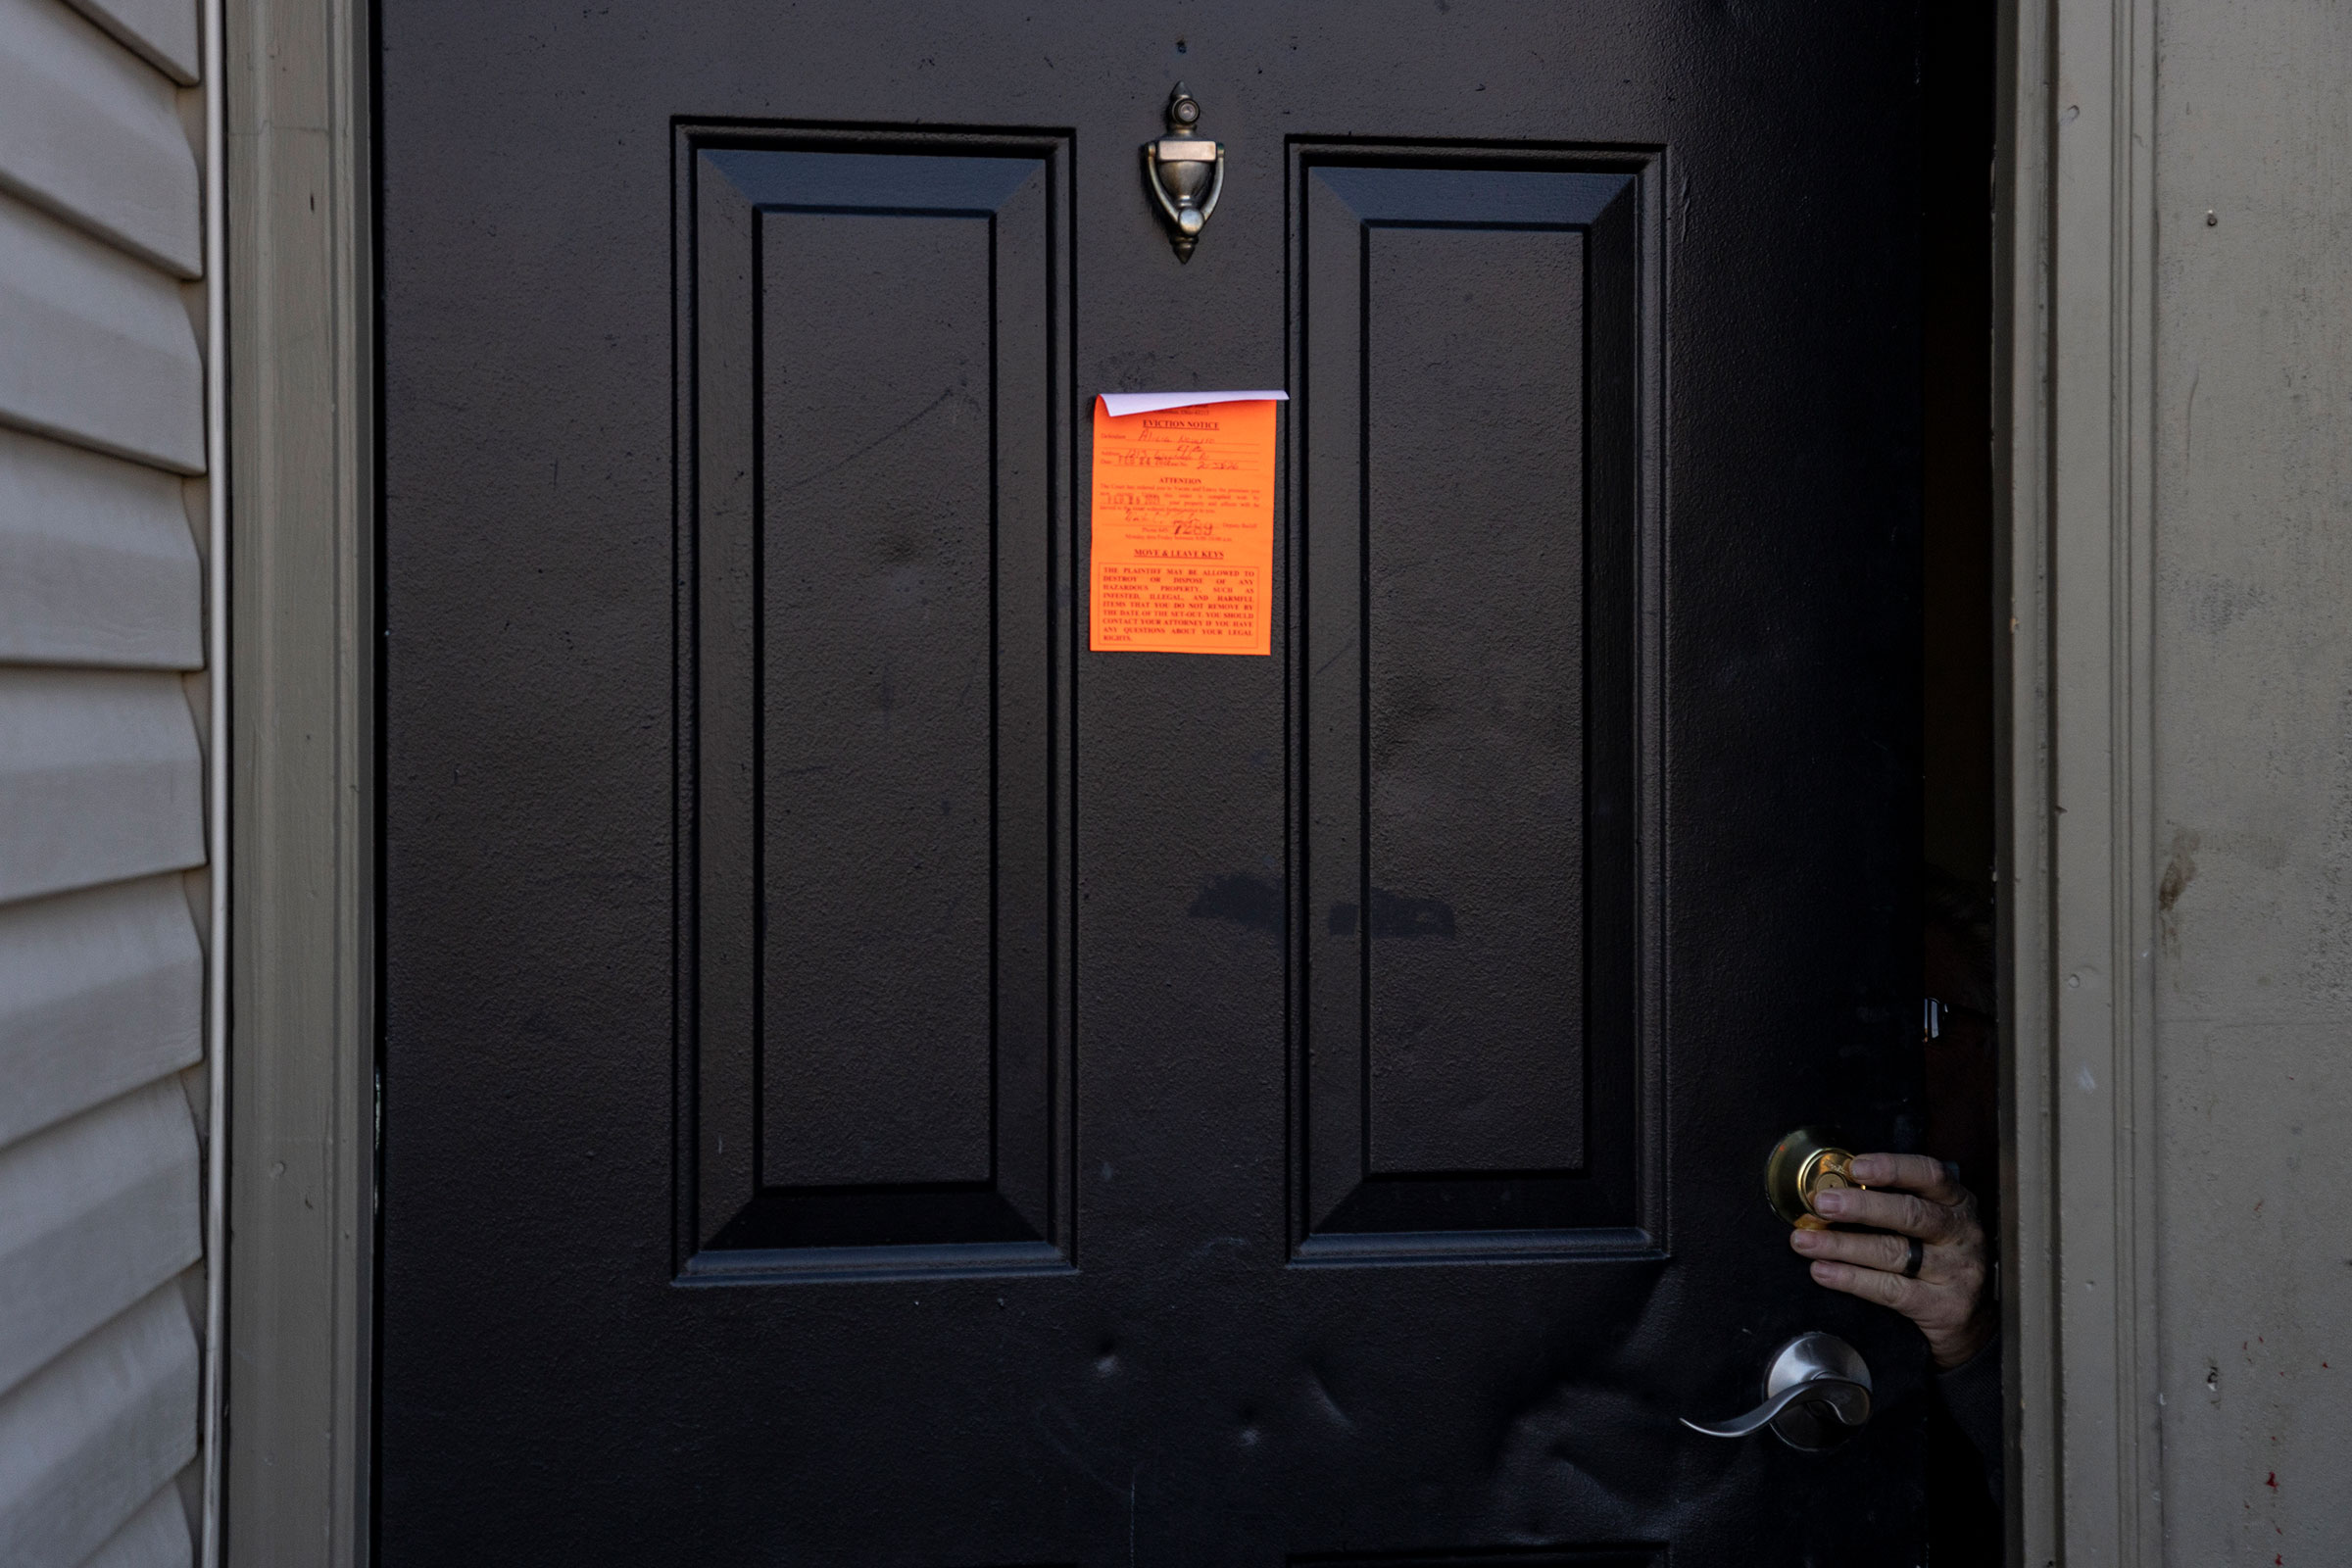 An eviction notice is posted and the lock is changed on a door in the unincorporated community of Galloway west of Columbus, Ohio on March 3, 2021. (Stephen Zenner—Getty Images)